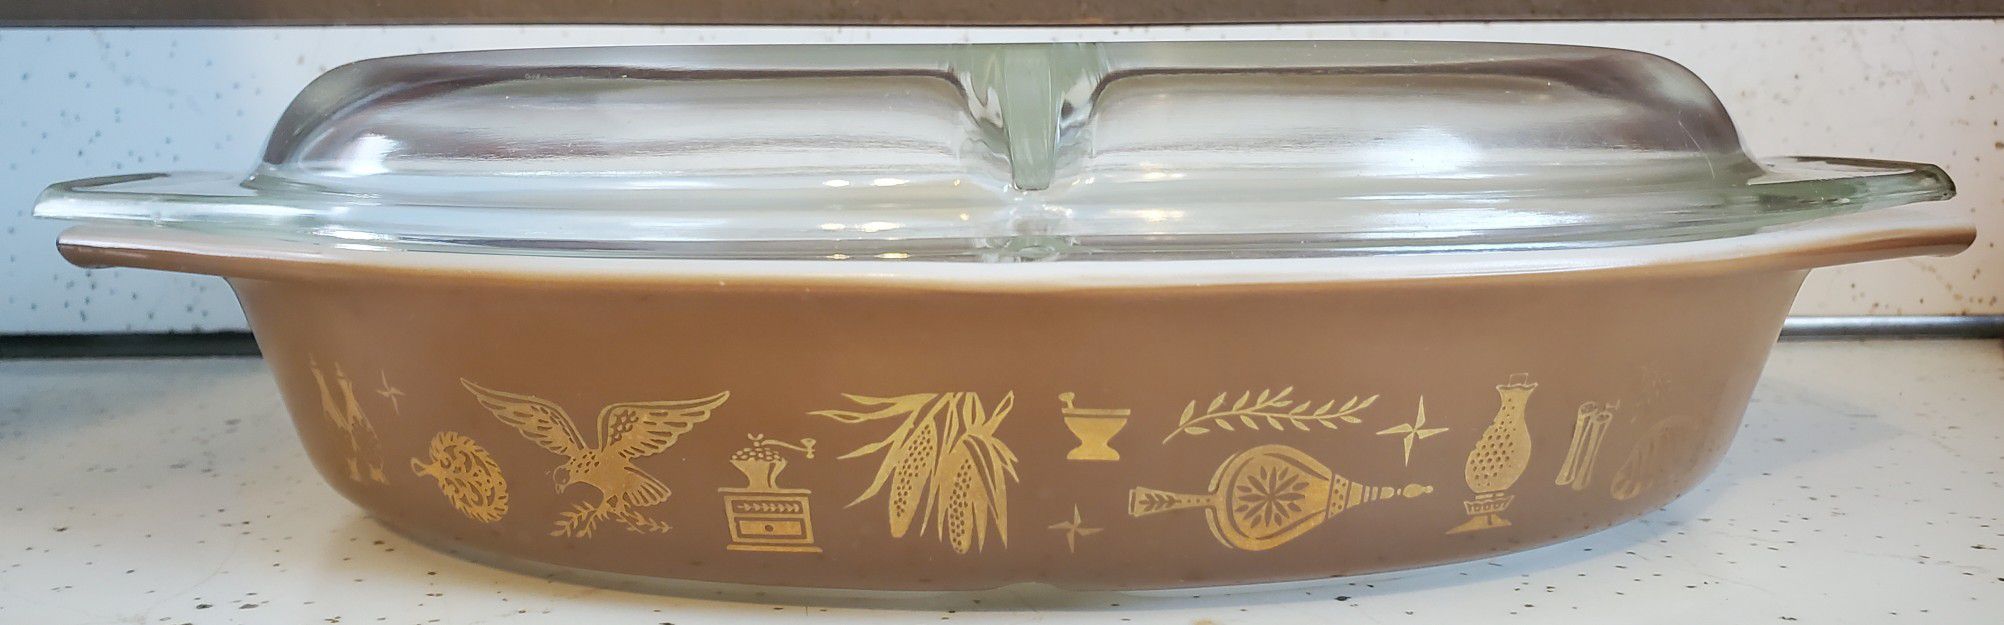 Vintage Pyrex 19 Oval Casserole Dish w/945C33 Early American Brown 1- 1/2 Quart  Spacesaver Divided 